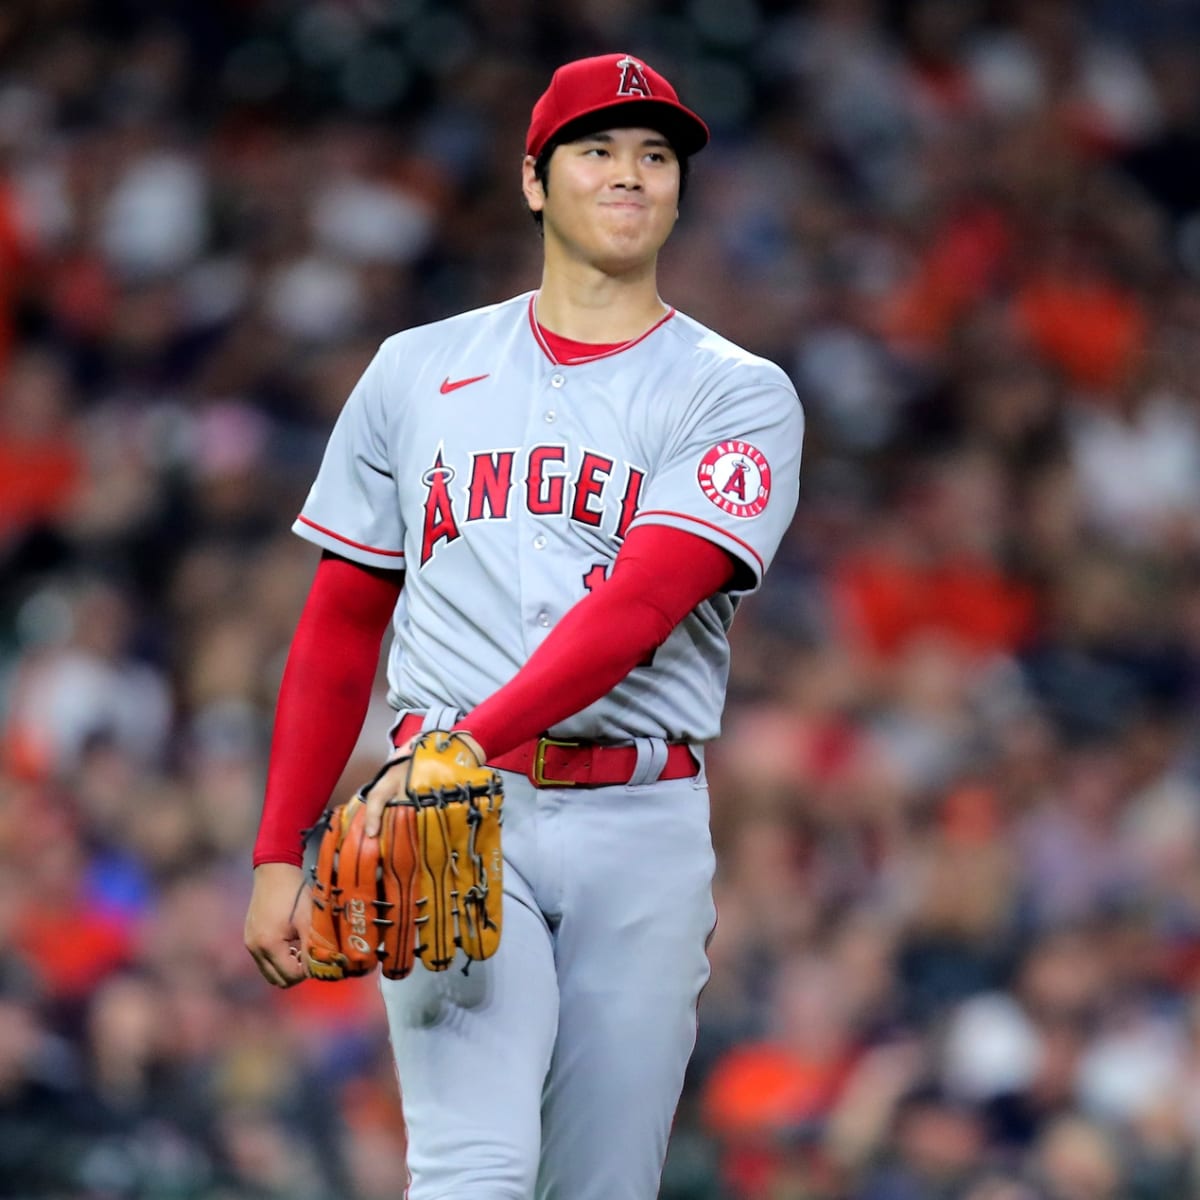 Shohei Ohtani furthers his Cy Young case in Angels' win – Orange